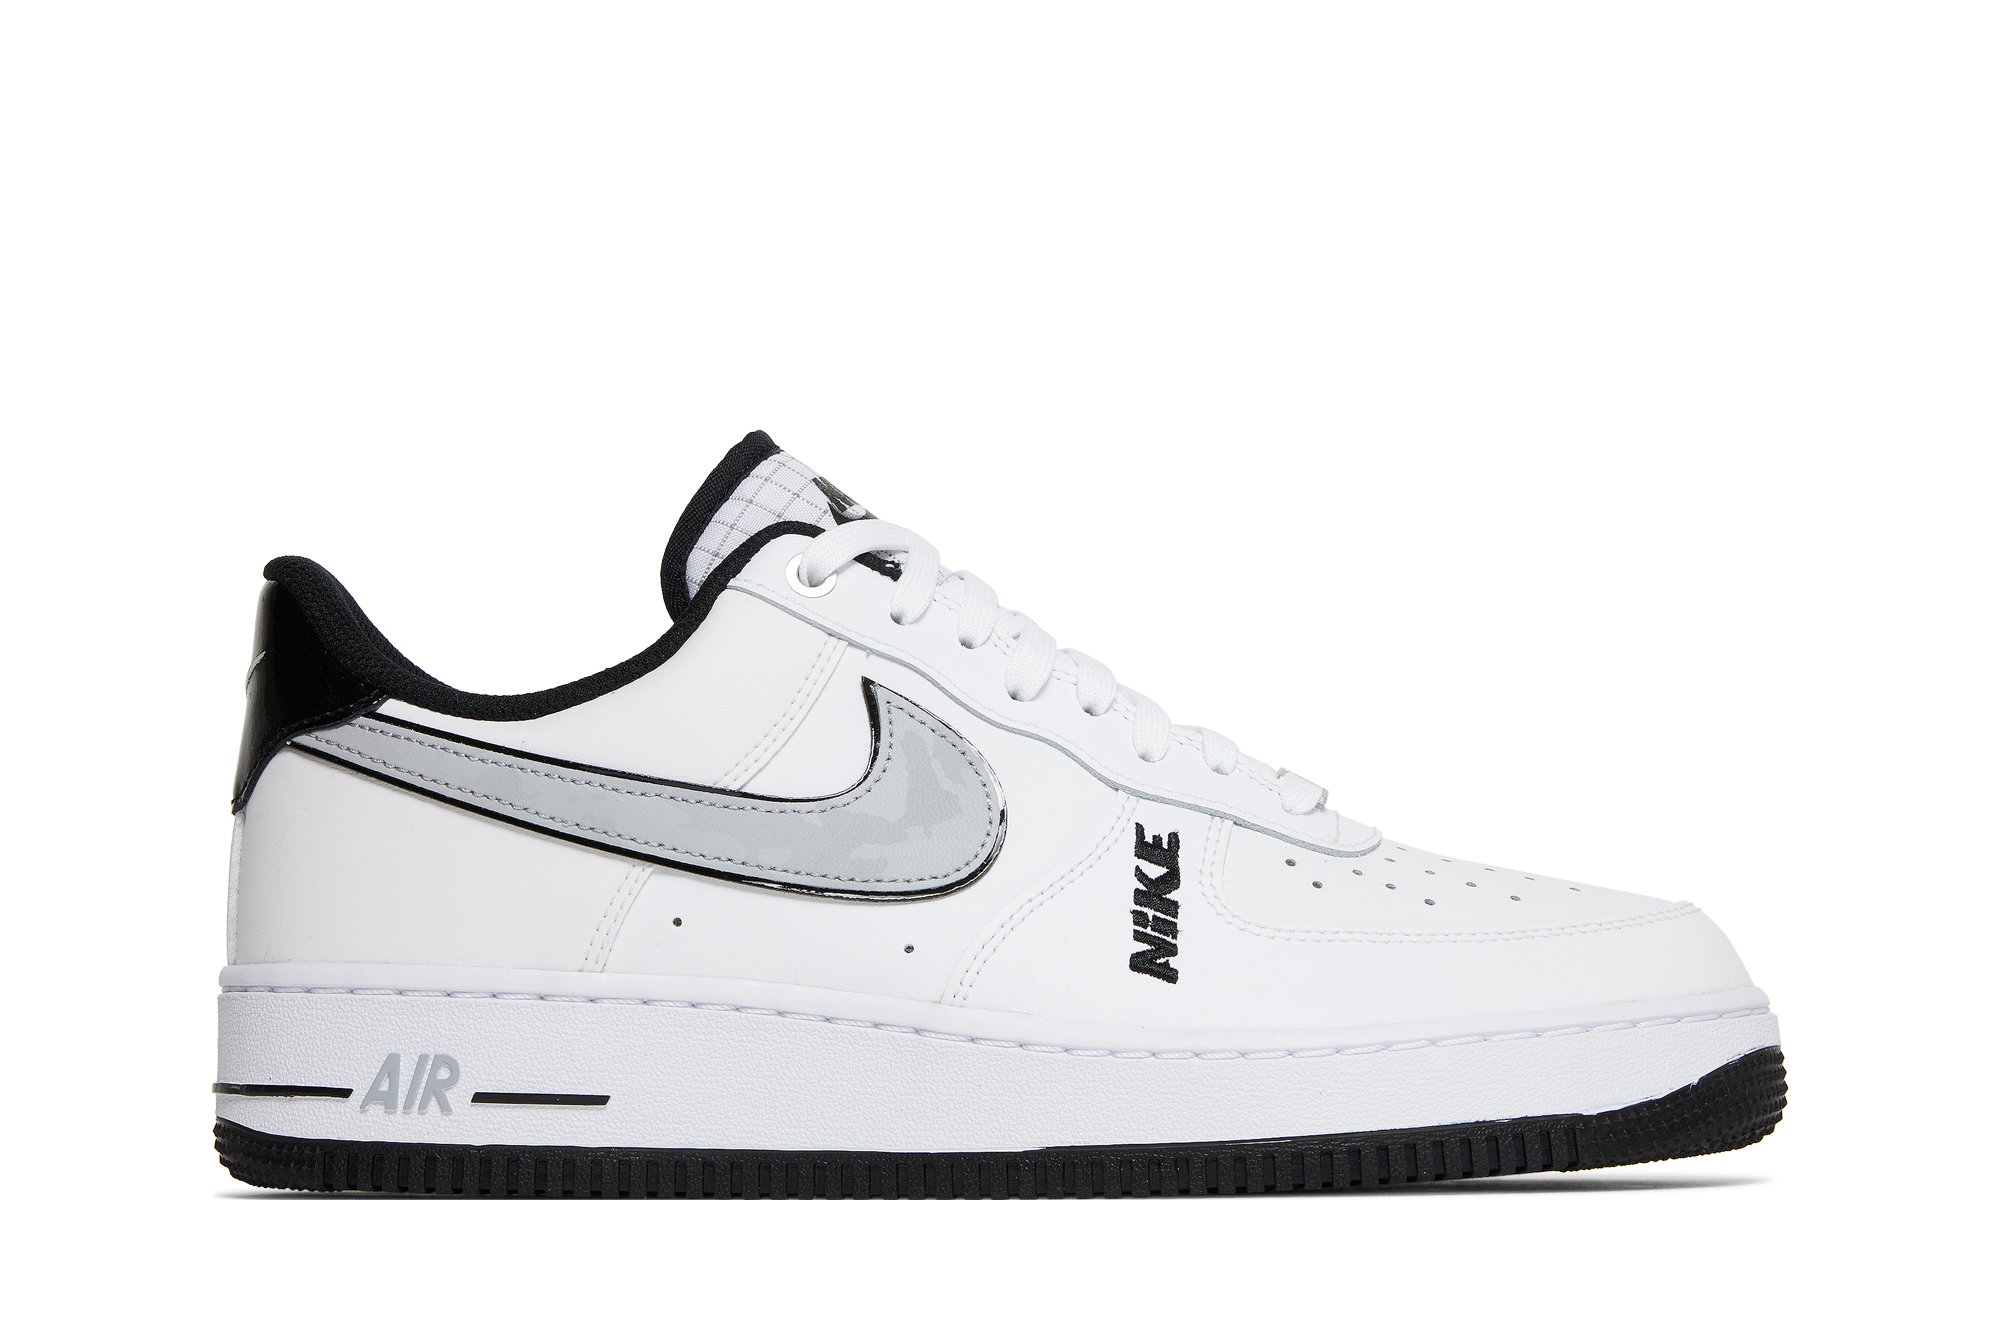 Buy Air Force 1 '07 LV8 'White Wolf Grey' - DC8873 101 | GOAT